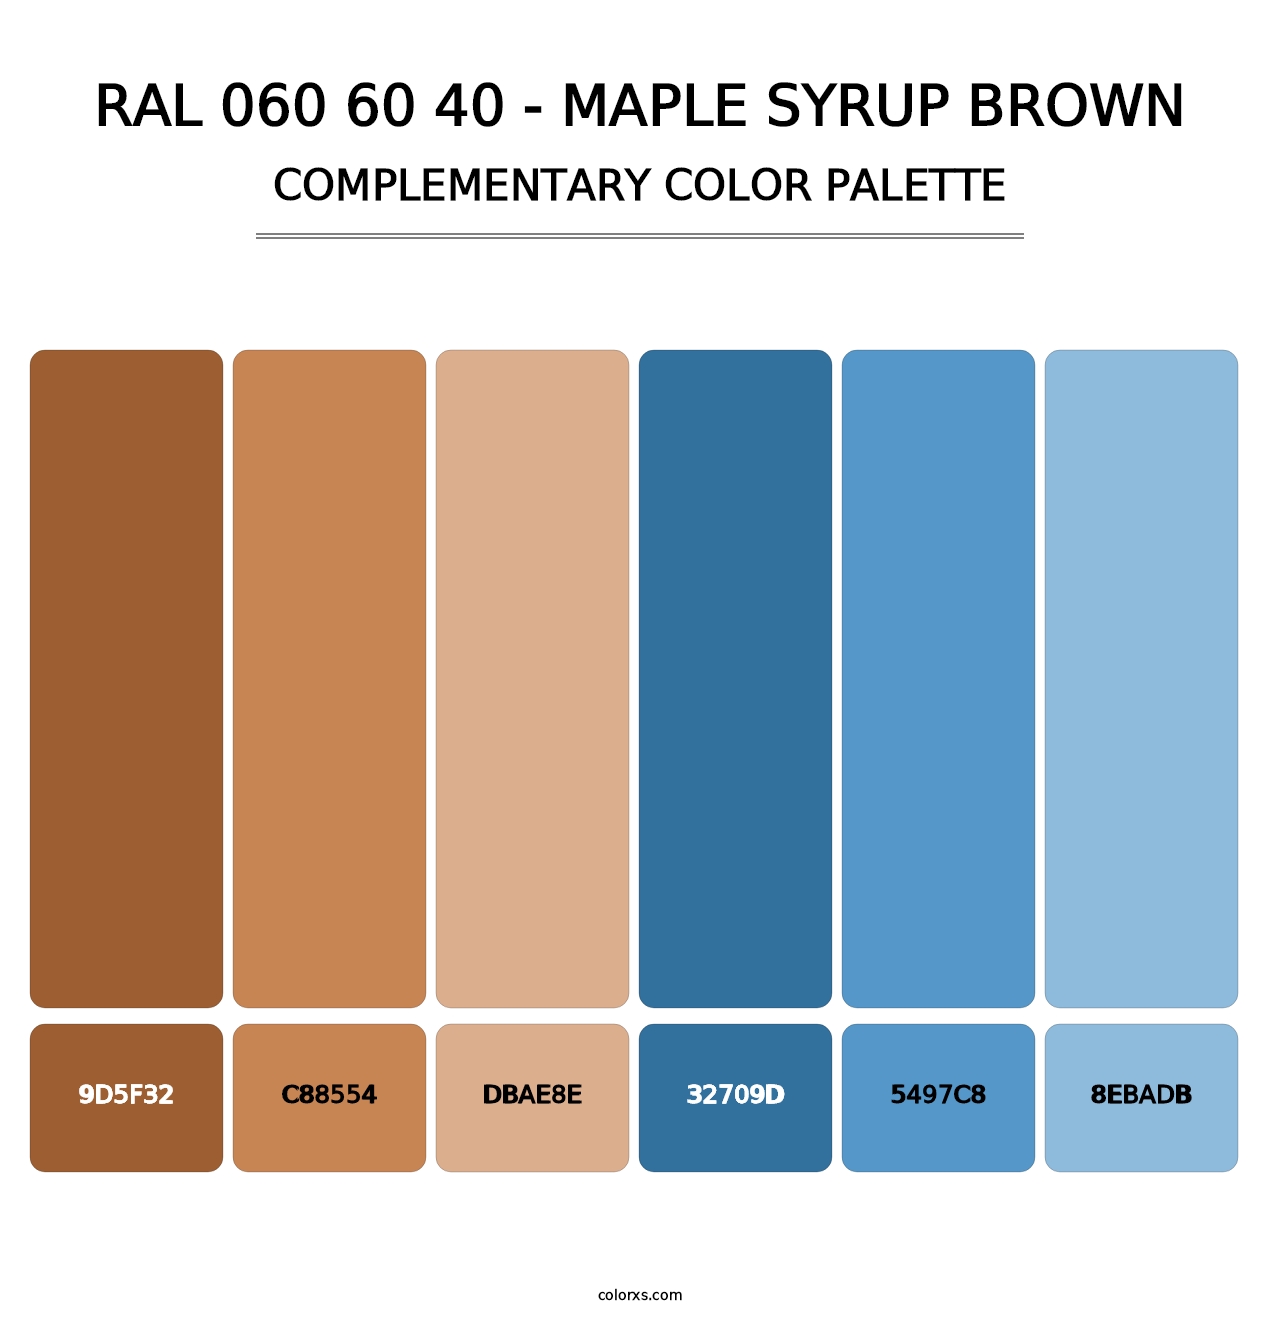 RAL 060 60 40 - Maple Syrup Brown - Complementary Color Palette